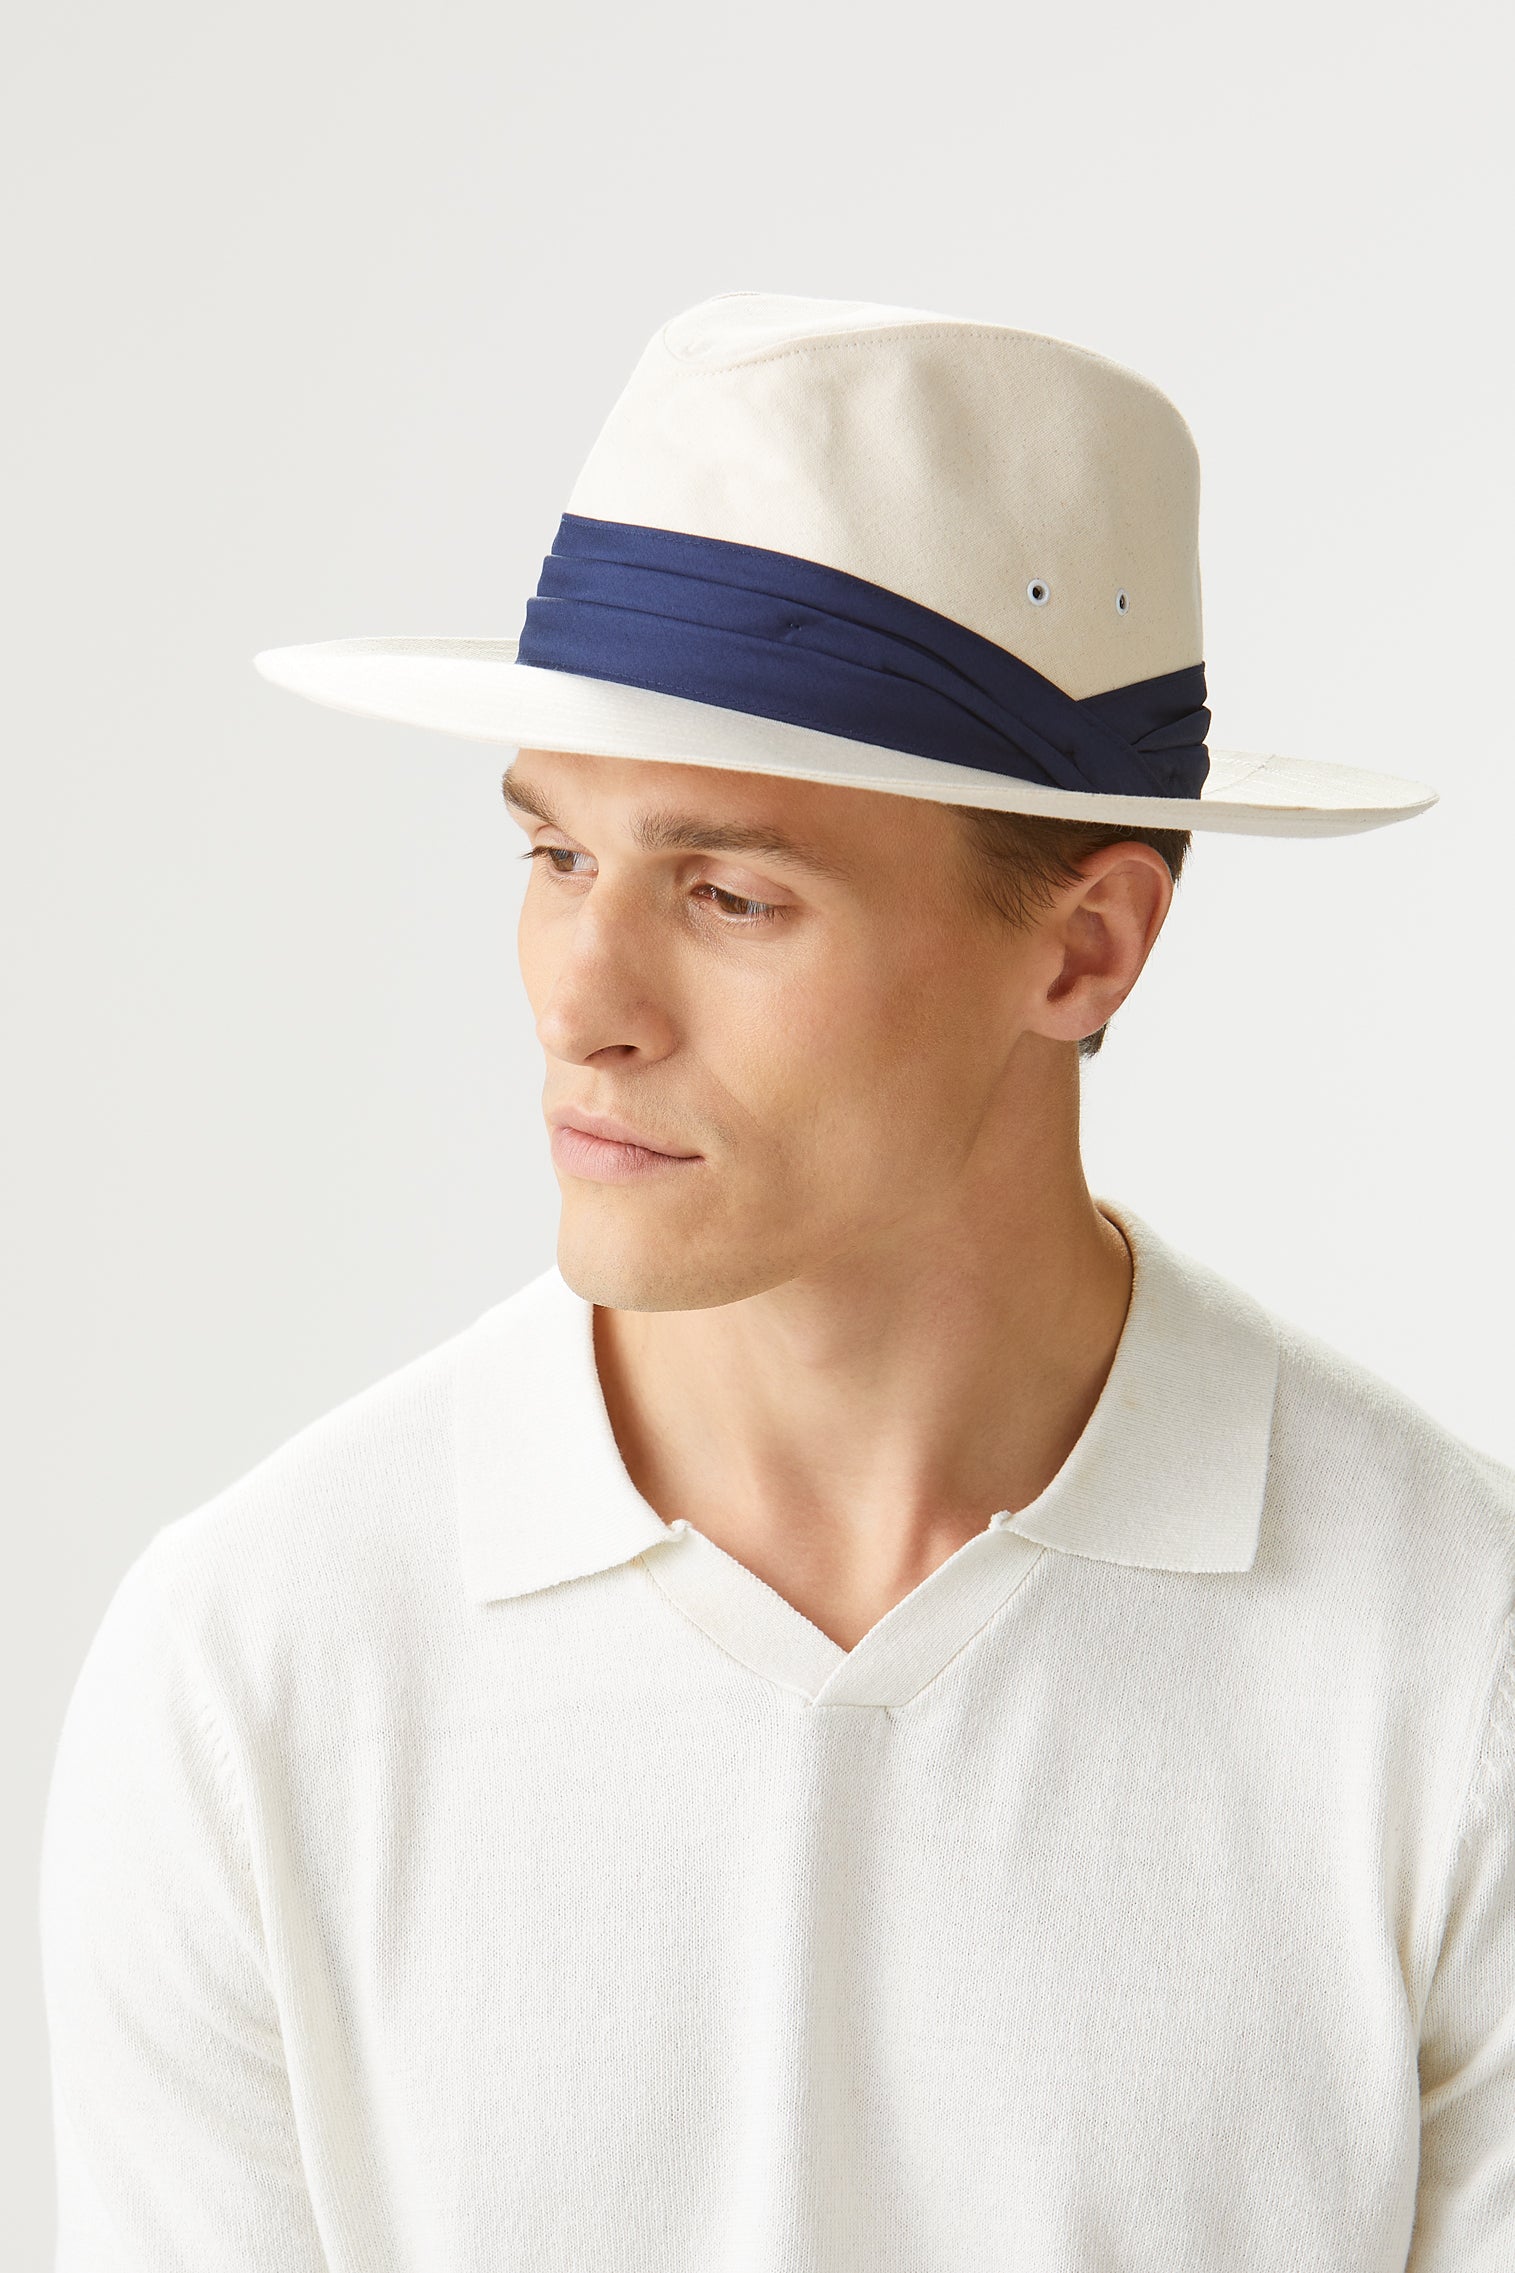 Namibia Calico Fedora - Hats for Square Face Shapes - Lock & Co. Hatters London UK